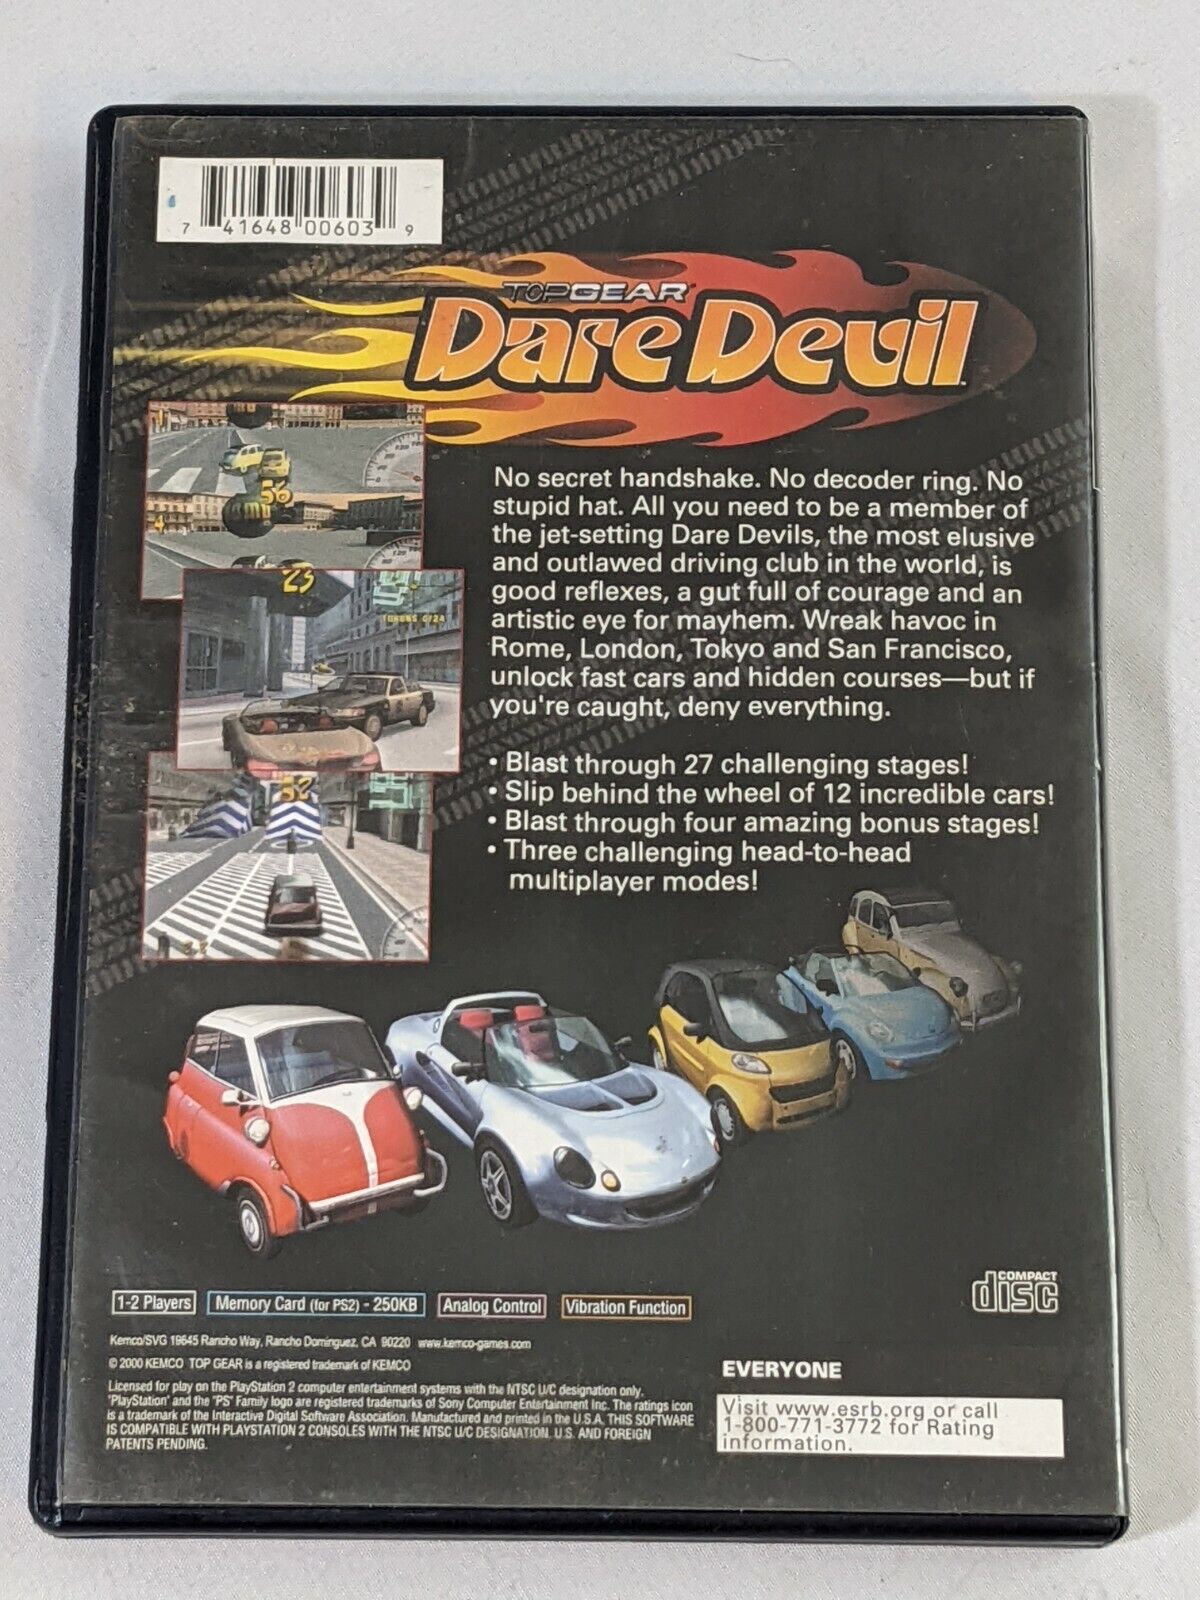 Playstation 2 PS2 Top Gear Dare Devil (2000) Car Racing Video Game by Kemco